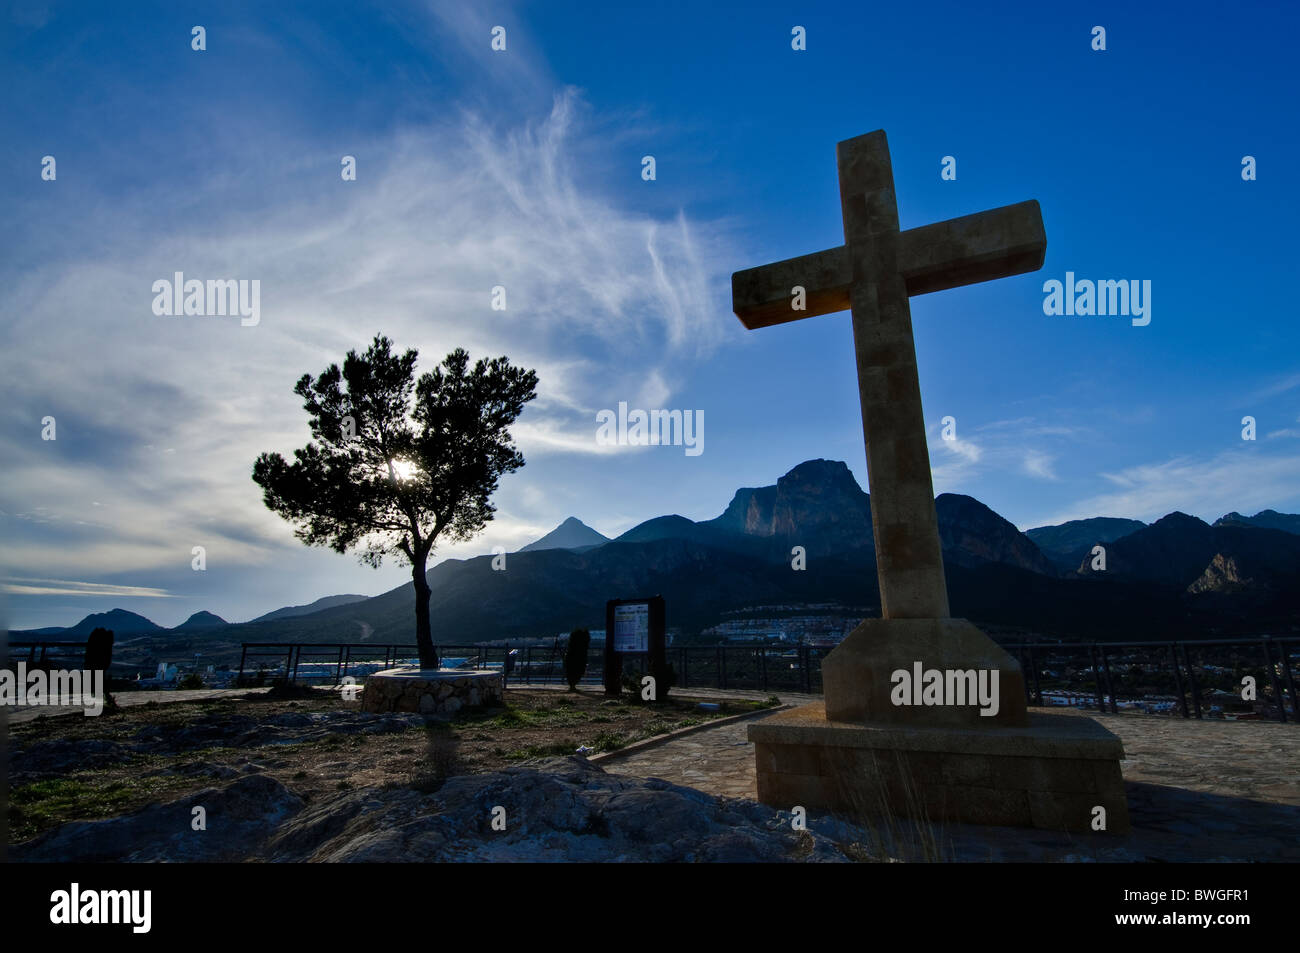 A cross against a blue cloudy sky in the town of La Nucia, Spain Stock Photo